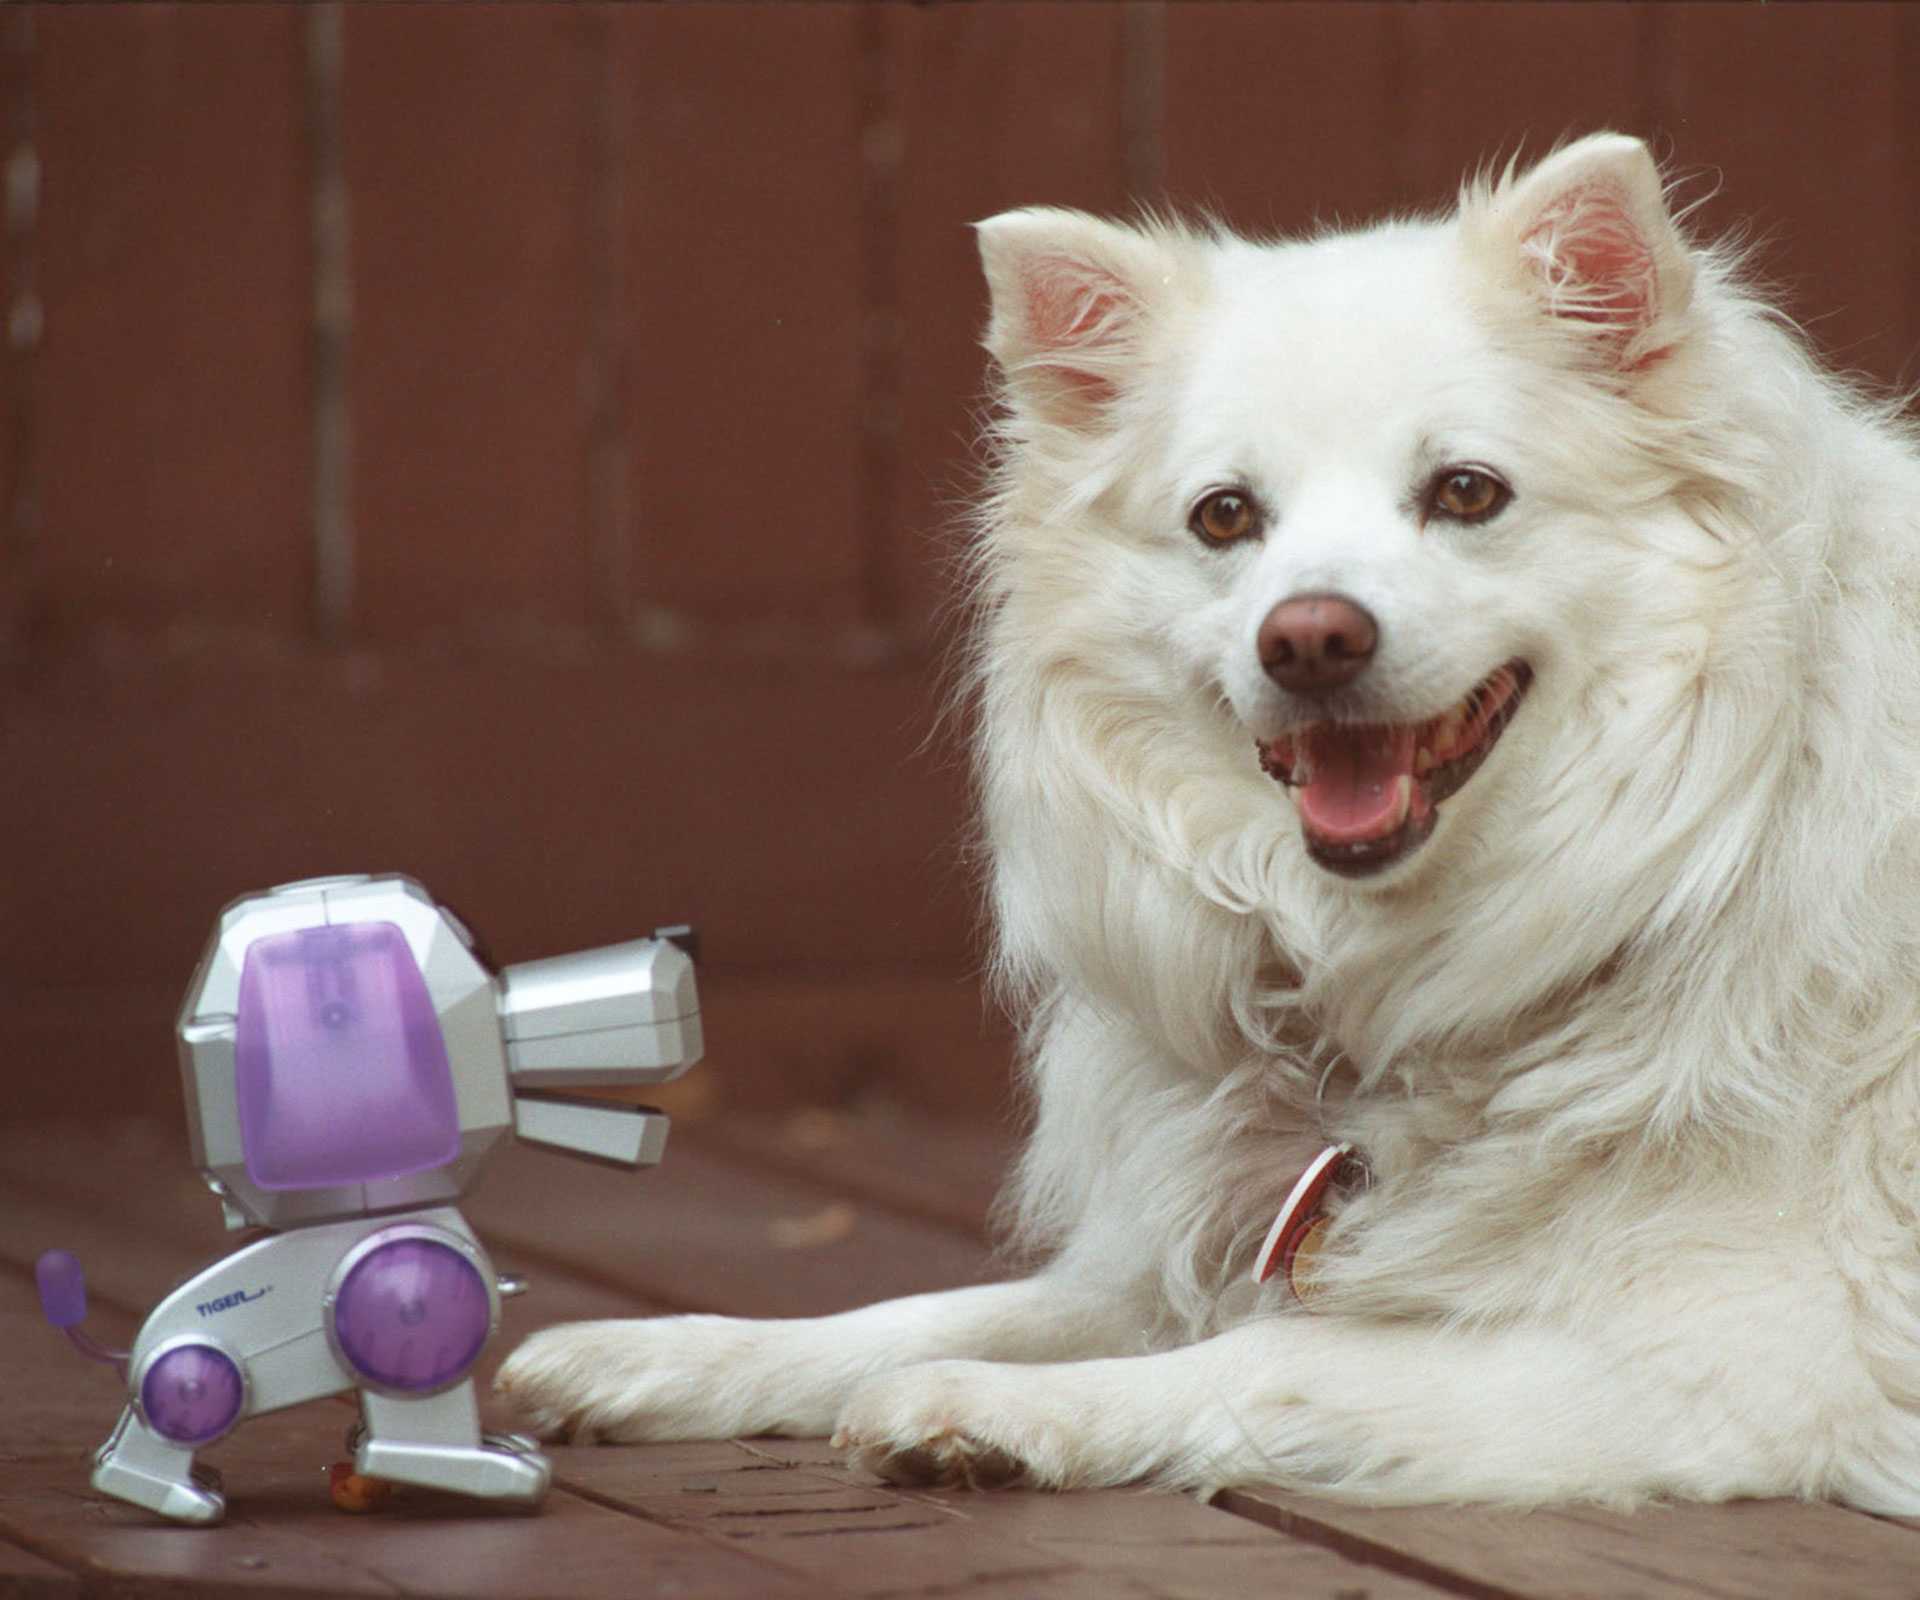 A robotic dog with its flesh-and-blood counterpart.